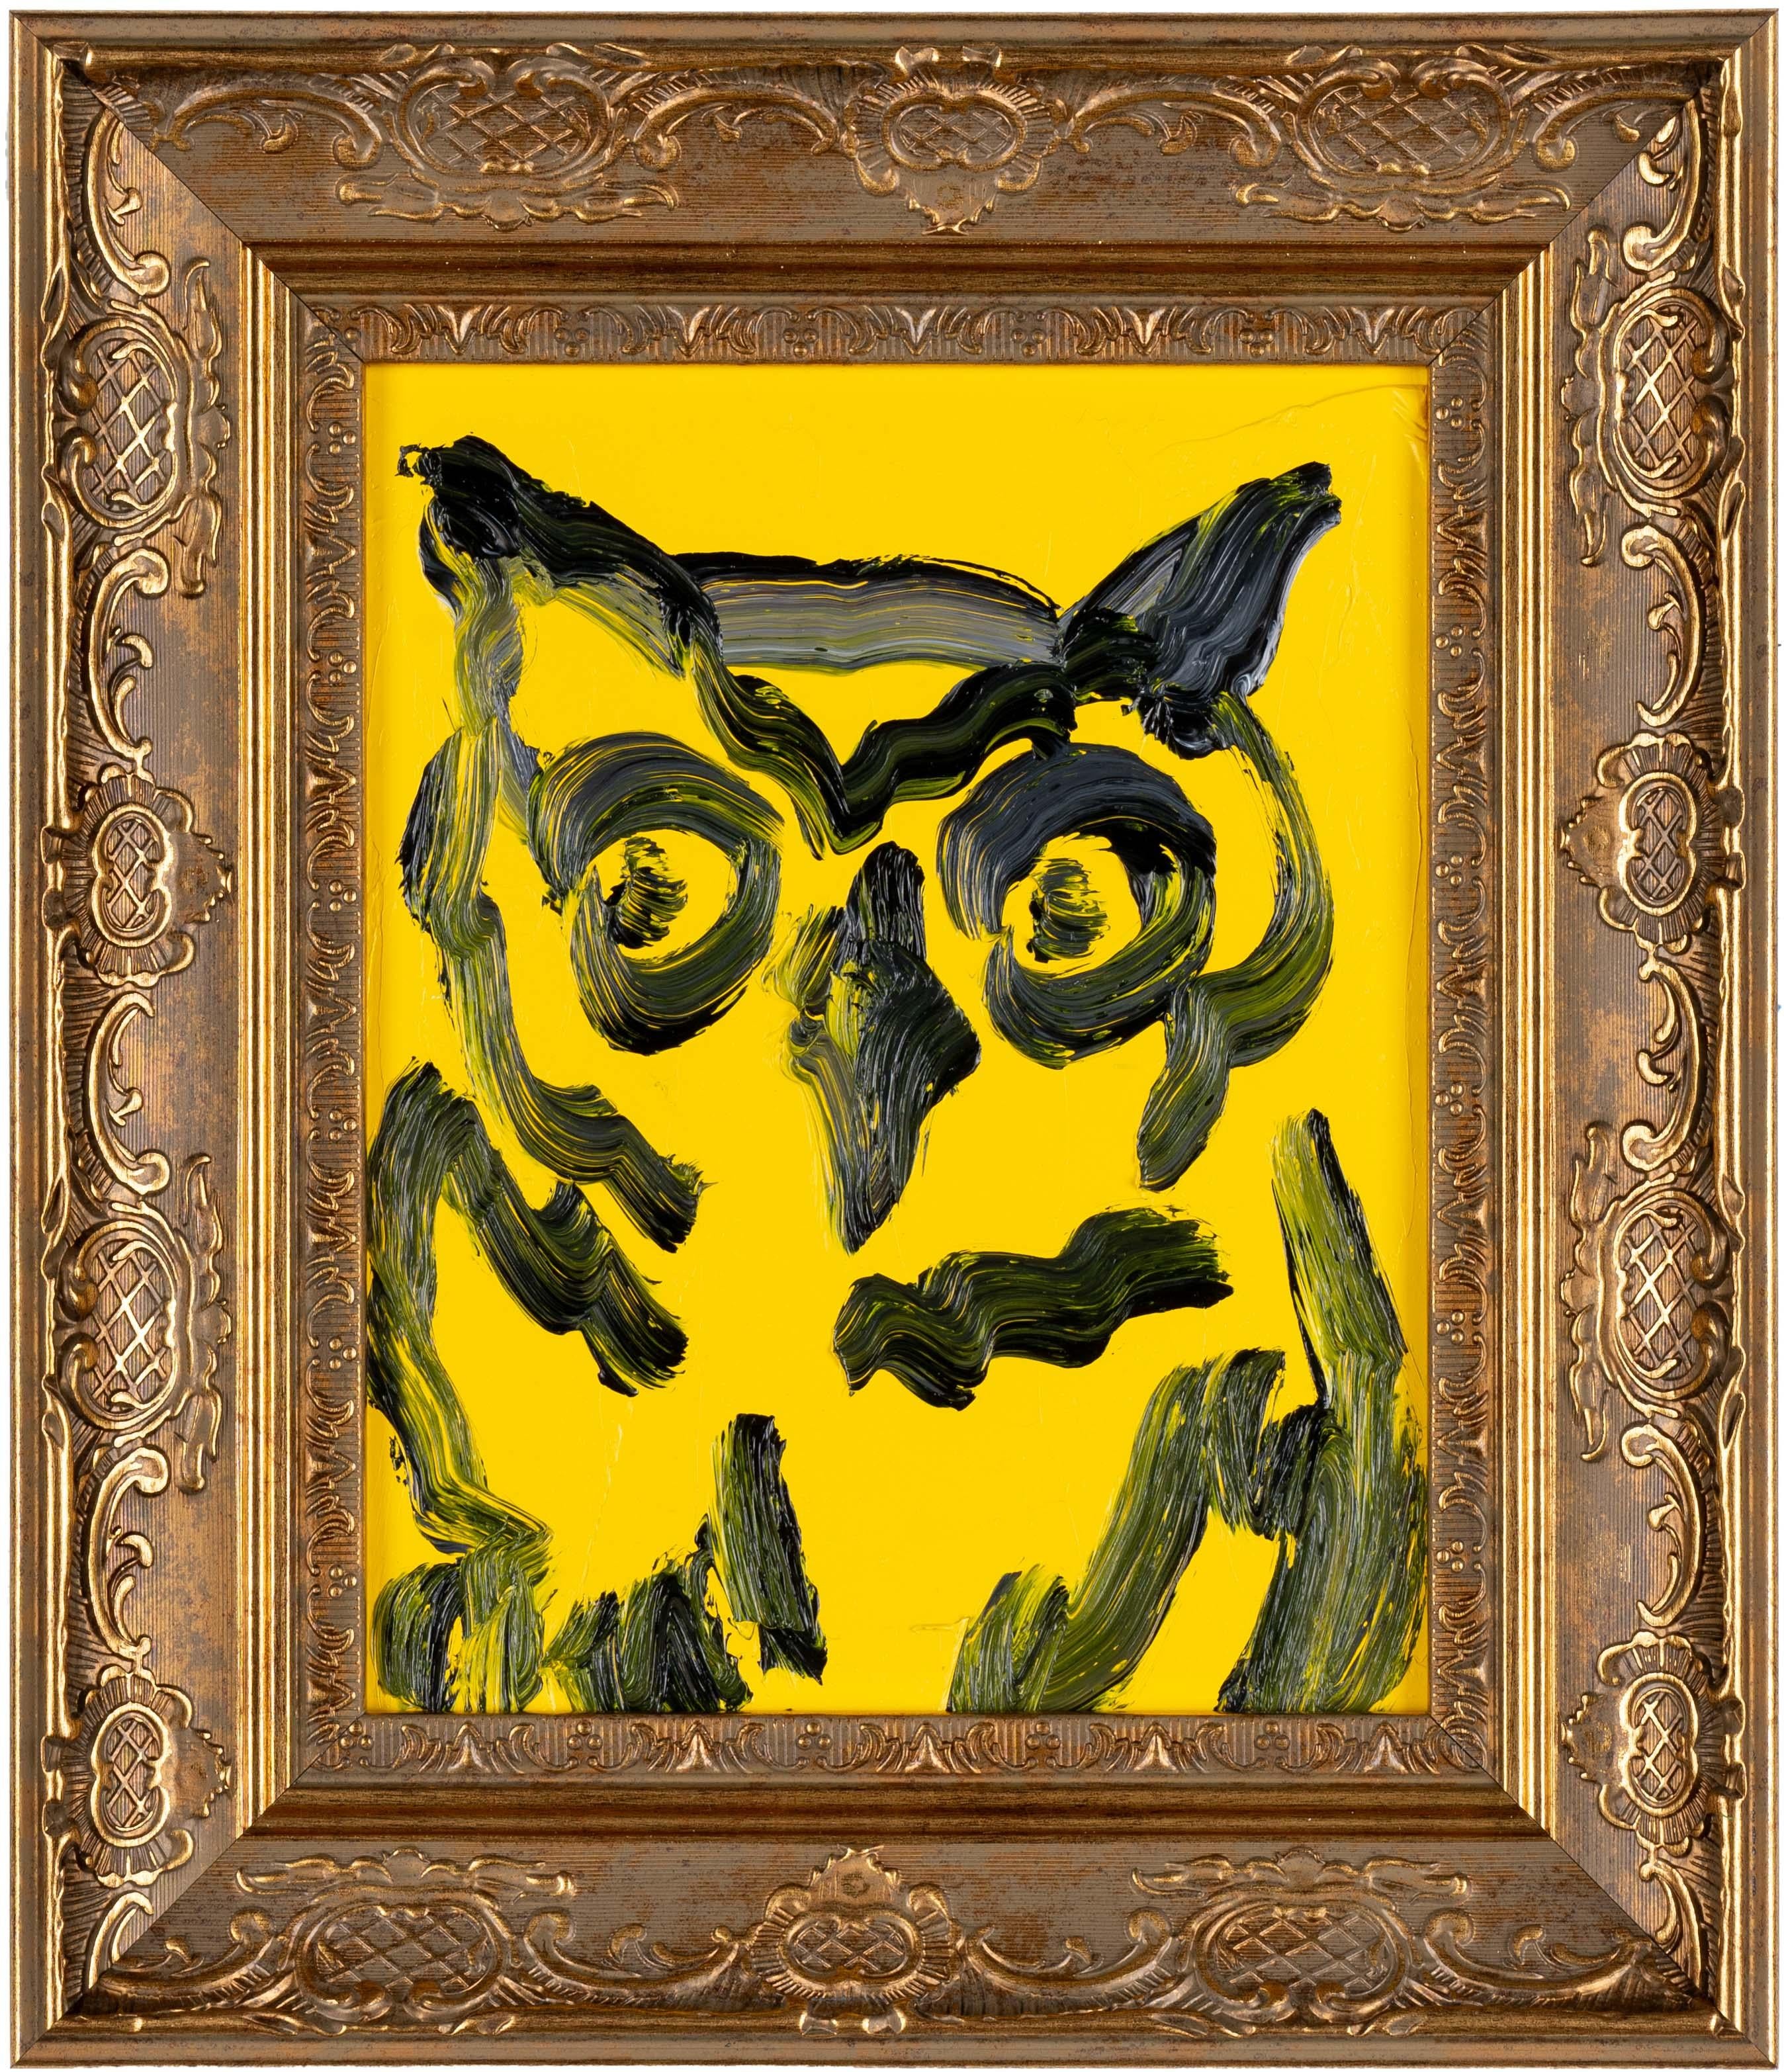 Hunt Slonem "Owl Seattle" Bird on Yellow
A back gestured owl on a yellow background. Framed in an antique gold wooden frame. 

Unframed: 10 x 8 inches
Framed: 14.5 x 12.5 inches
*Painting is framed - Please note Hunt Slonem paintings with frames may